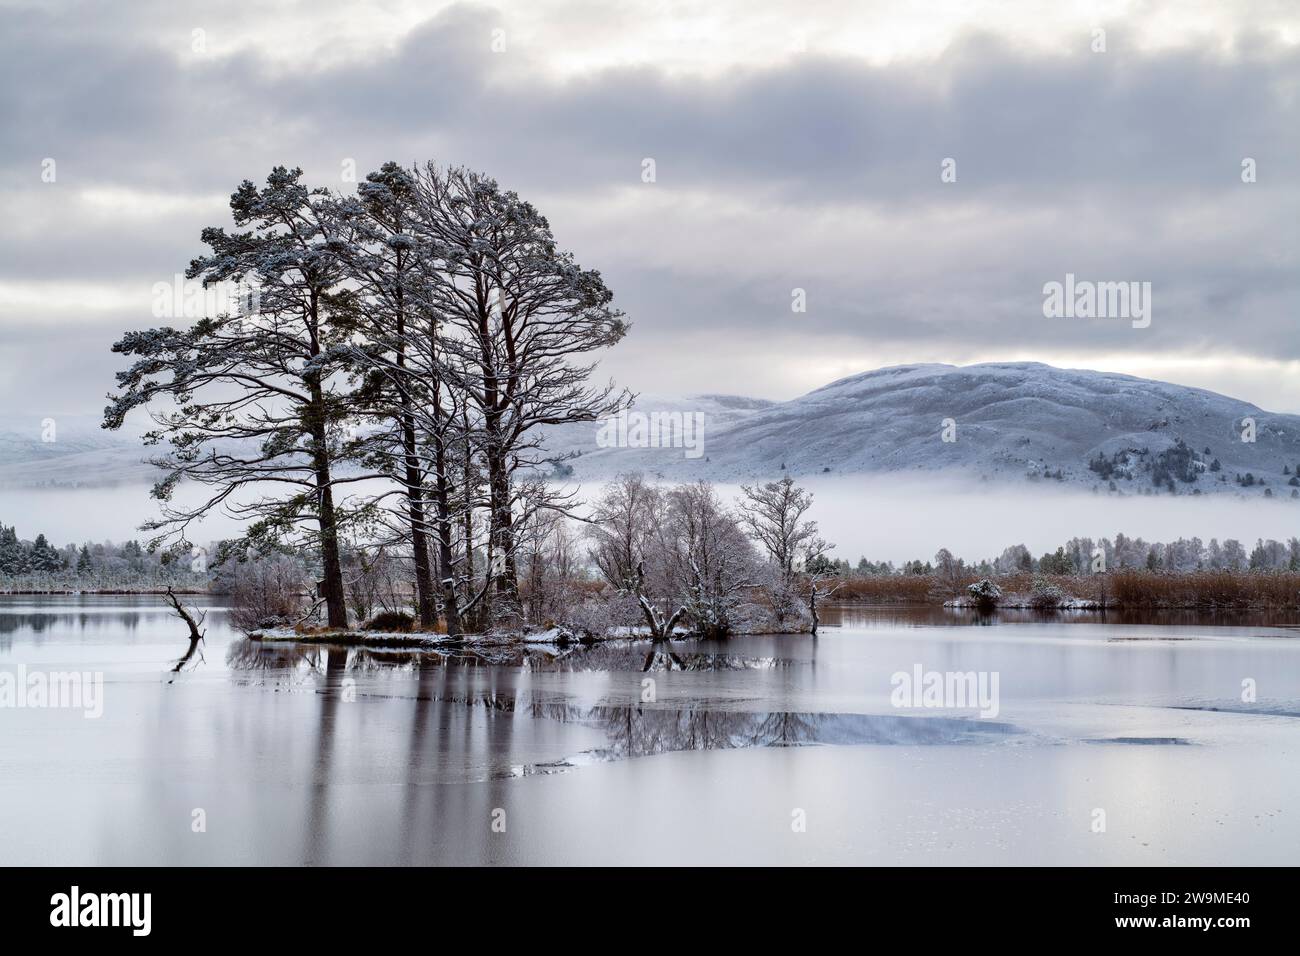 Loch Mallachie island in the snow, mist and ice, Highlands, Scotland Stock Photo